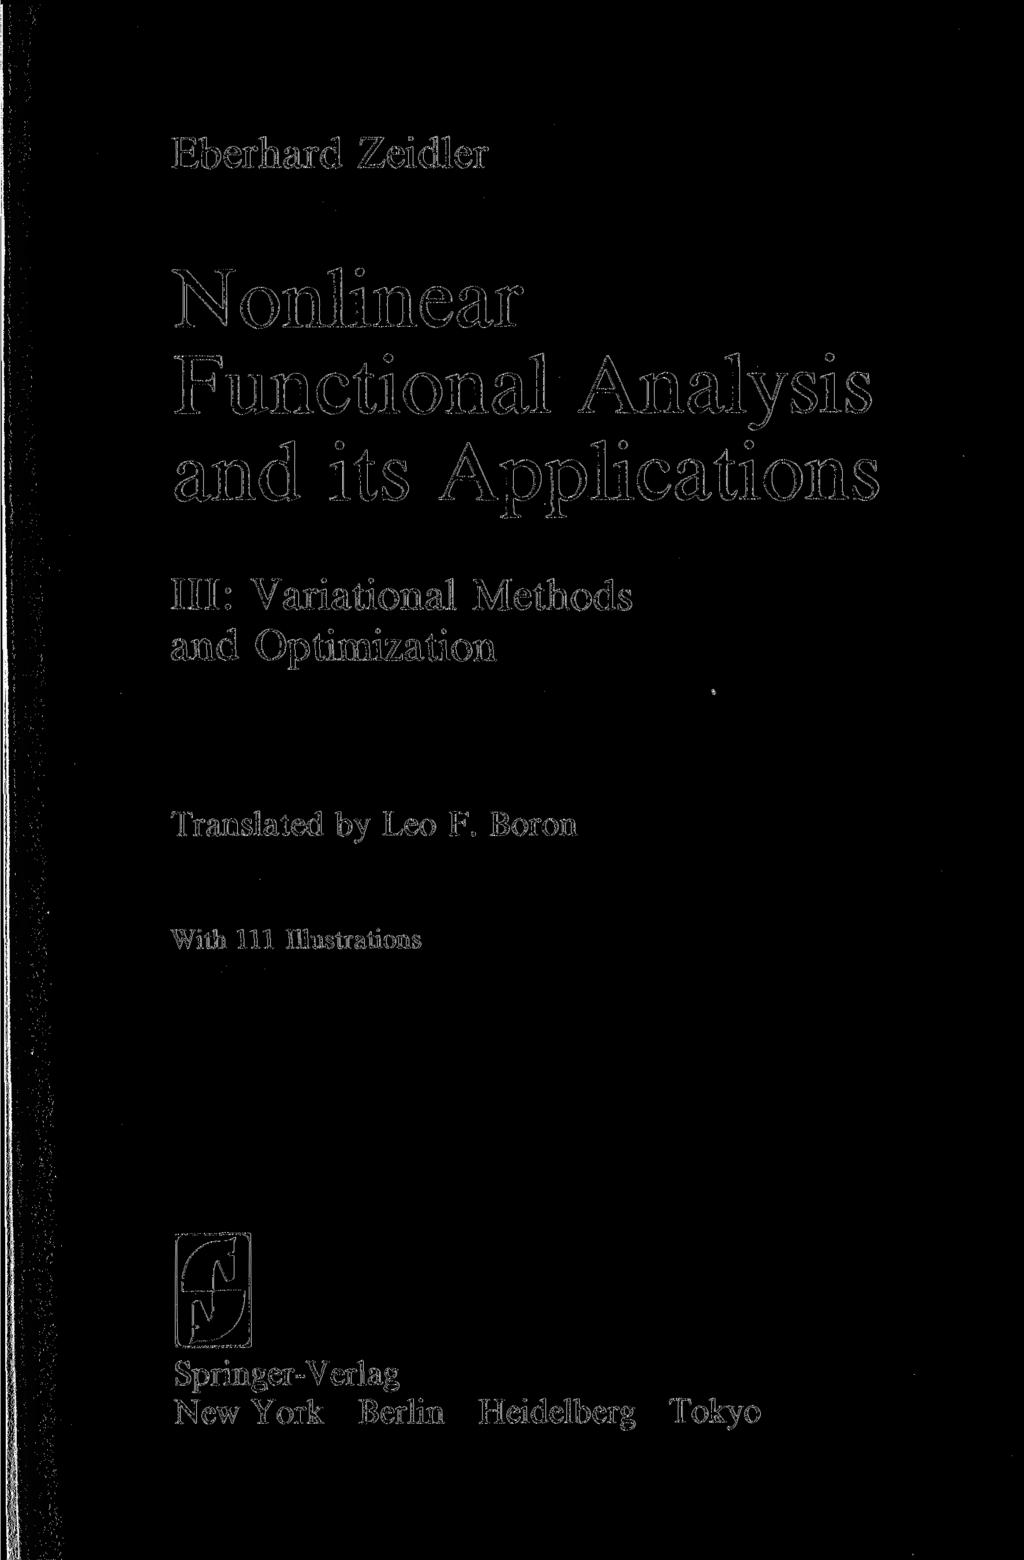 Eberhard Zeidler Nonlinear Functional Analysis and its Applications III: Variational Methods and